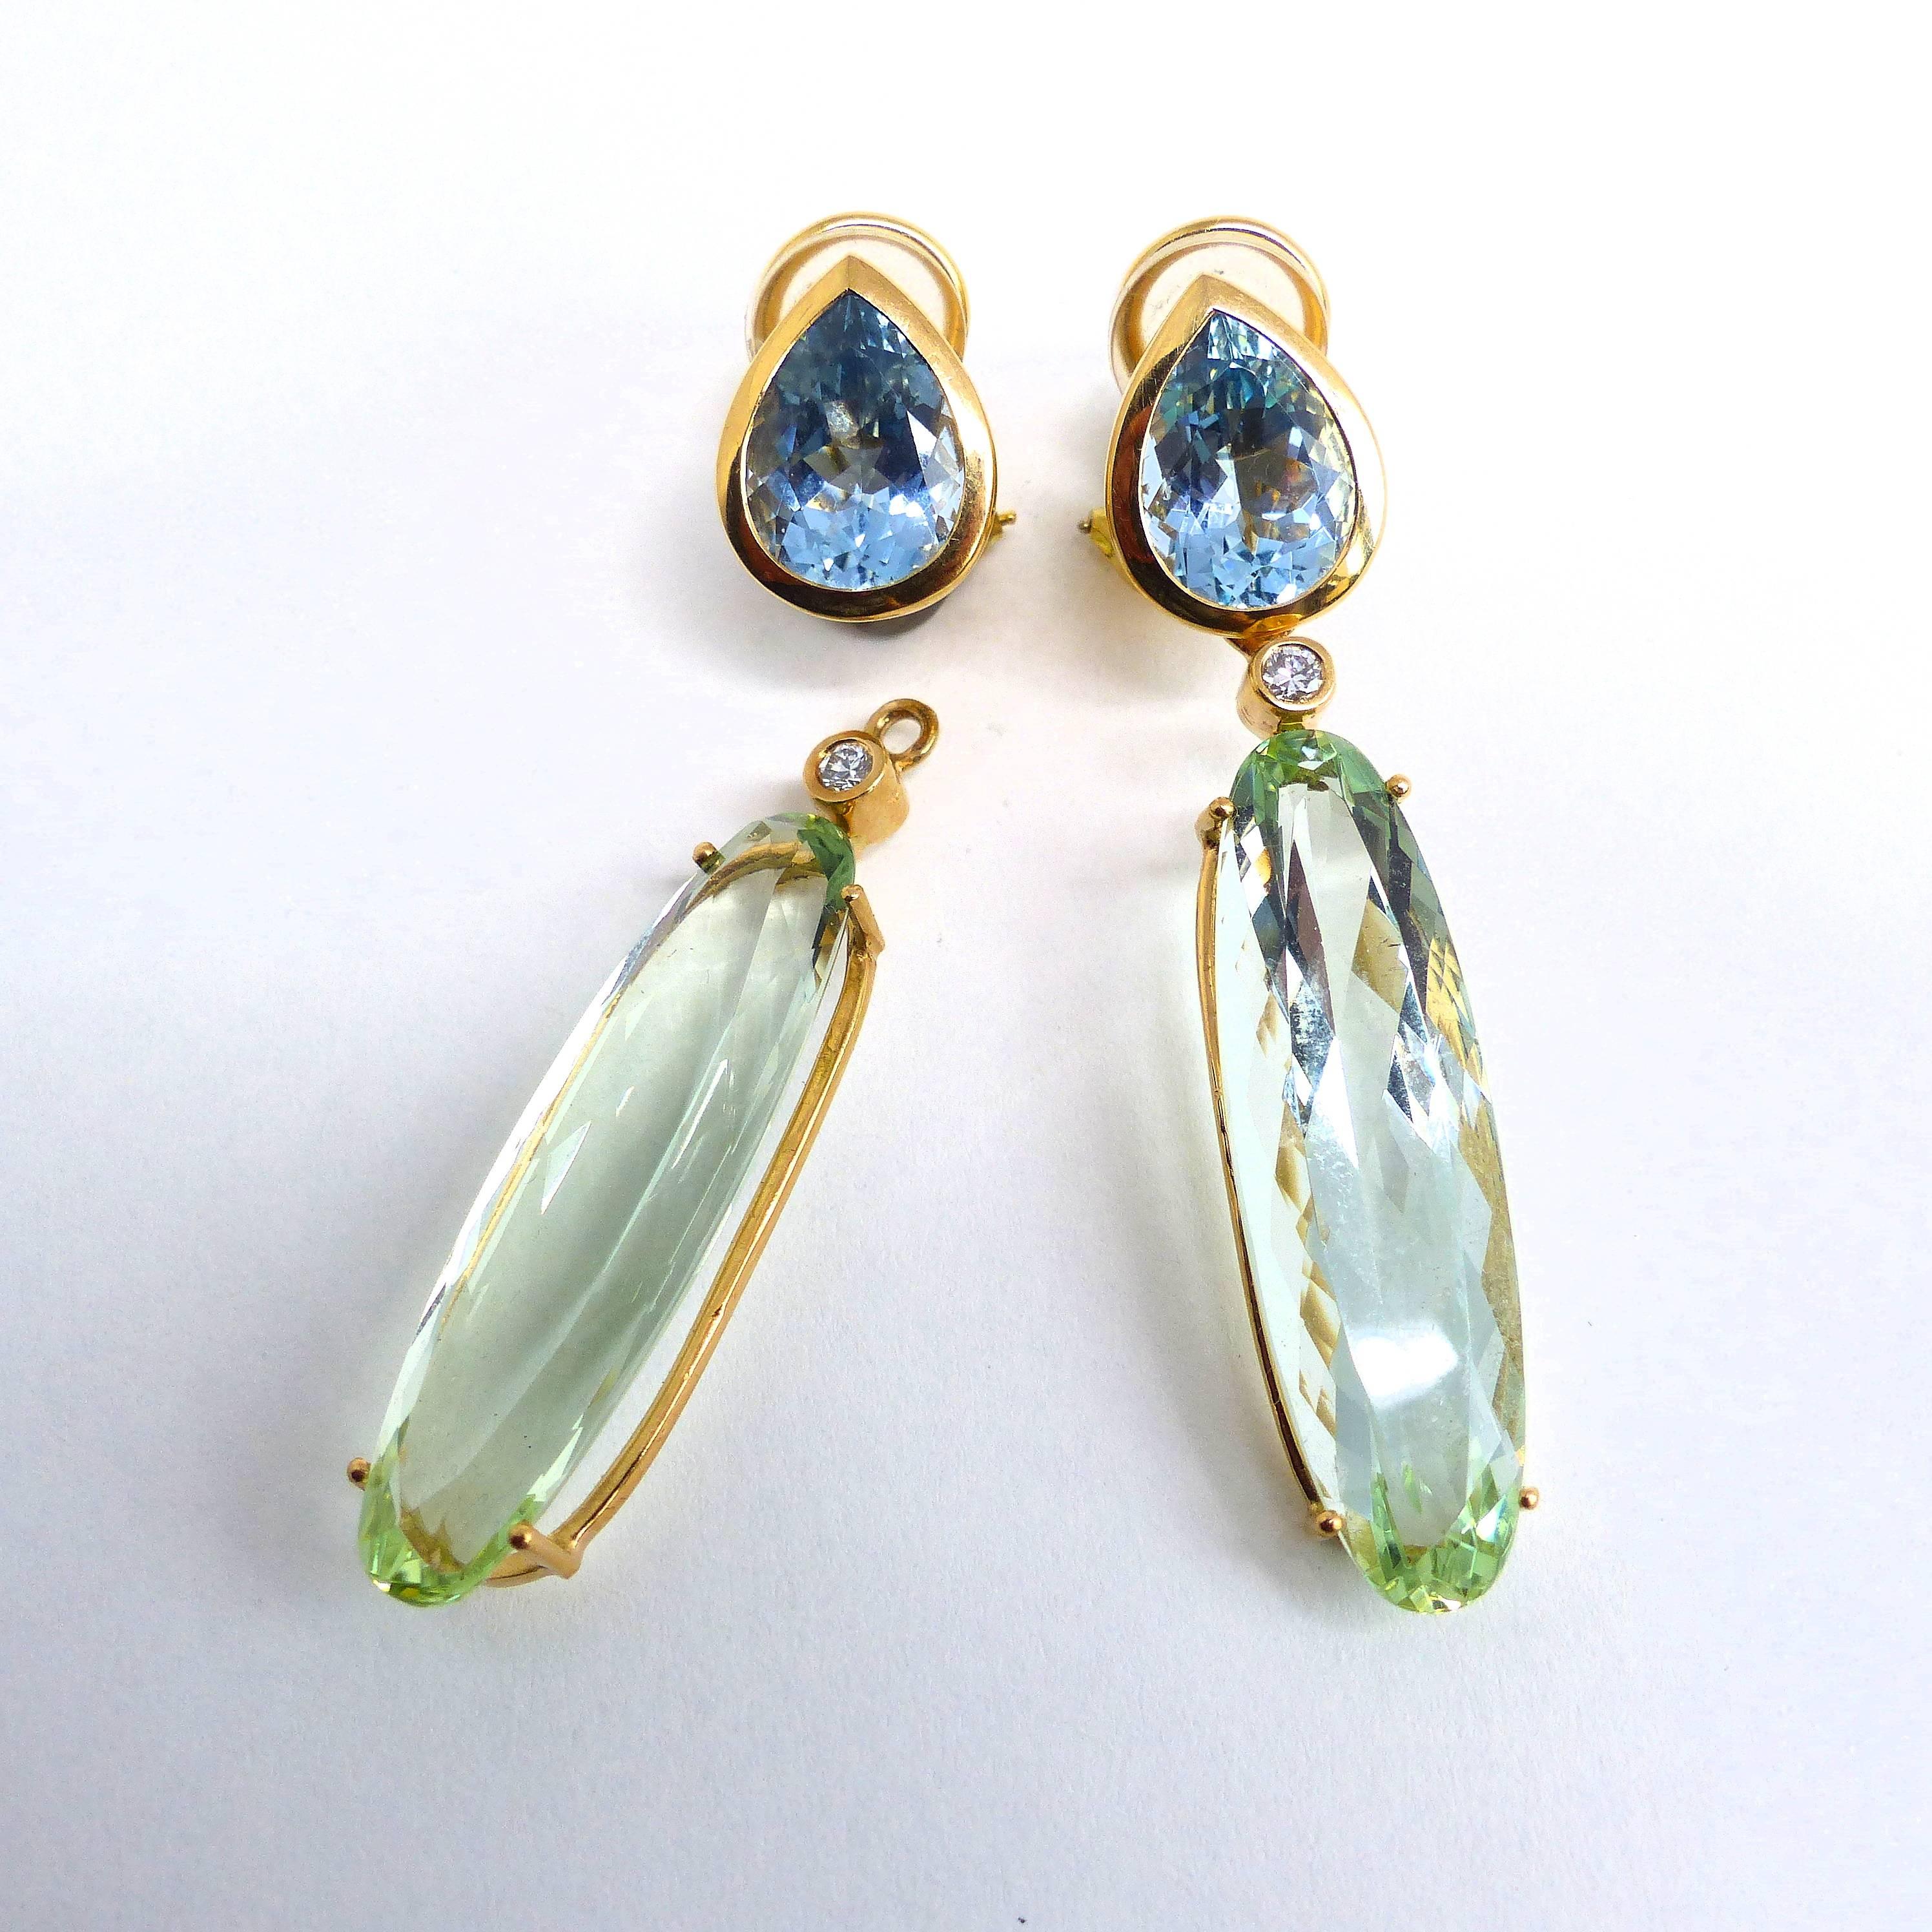 Thomas Leyser is renowned for his contemporary jewellery designs utilizing fine coloured gemstones and diamonds. 

This pair of earrings in 18k rose gold set with 2x fine Aquamarines (pear-shape, 12x9mm, 6.01ct) ! 2x fine Green Beryls (35x10,5mm,